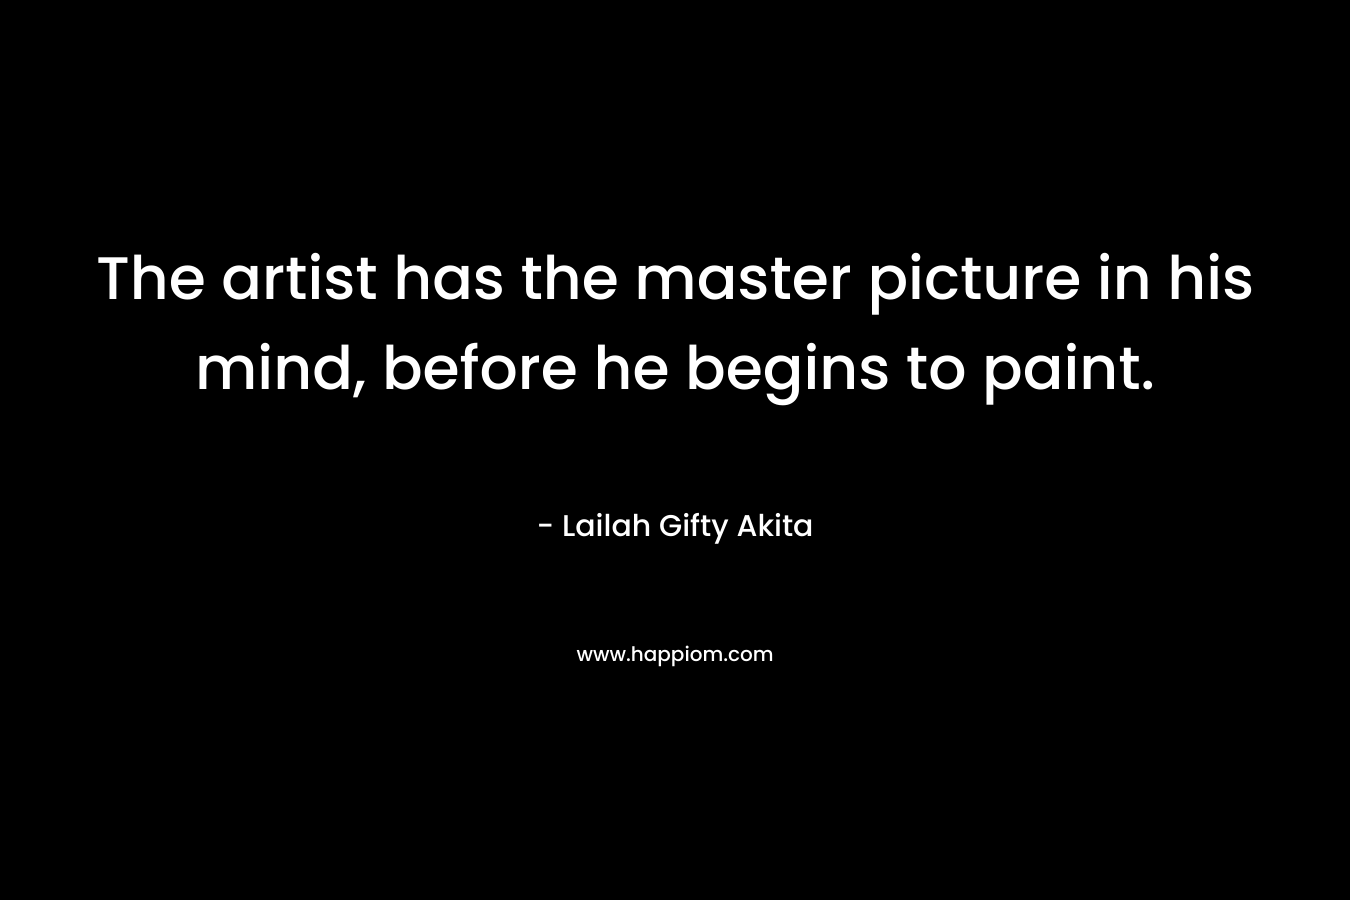 The artist has the master picture in his mind, before he begins to paint.